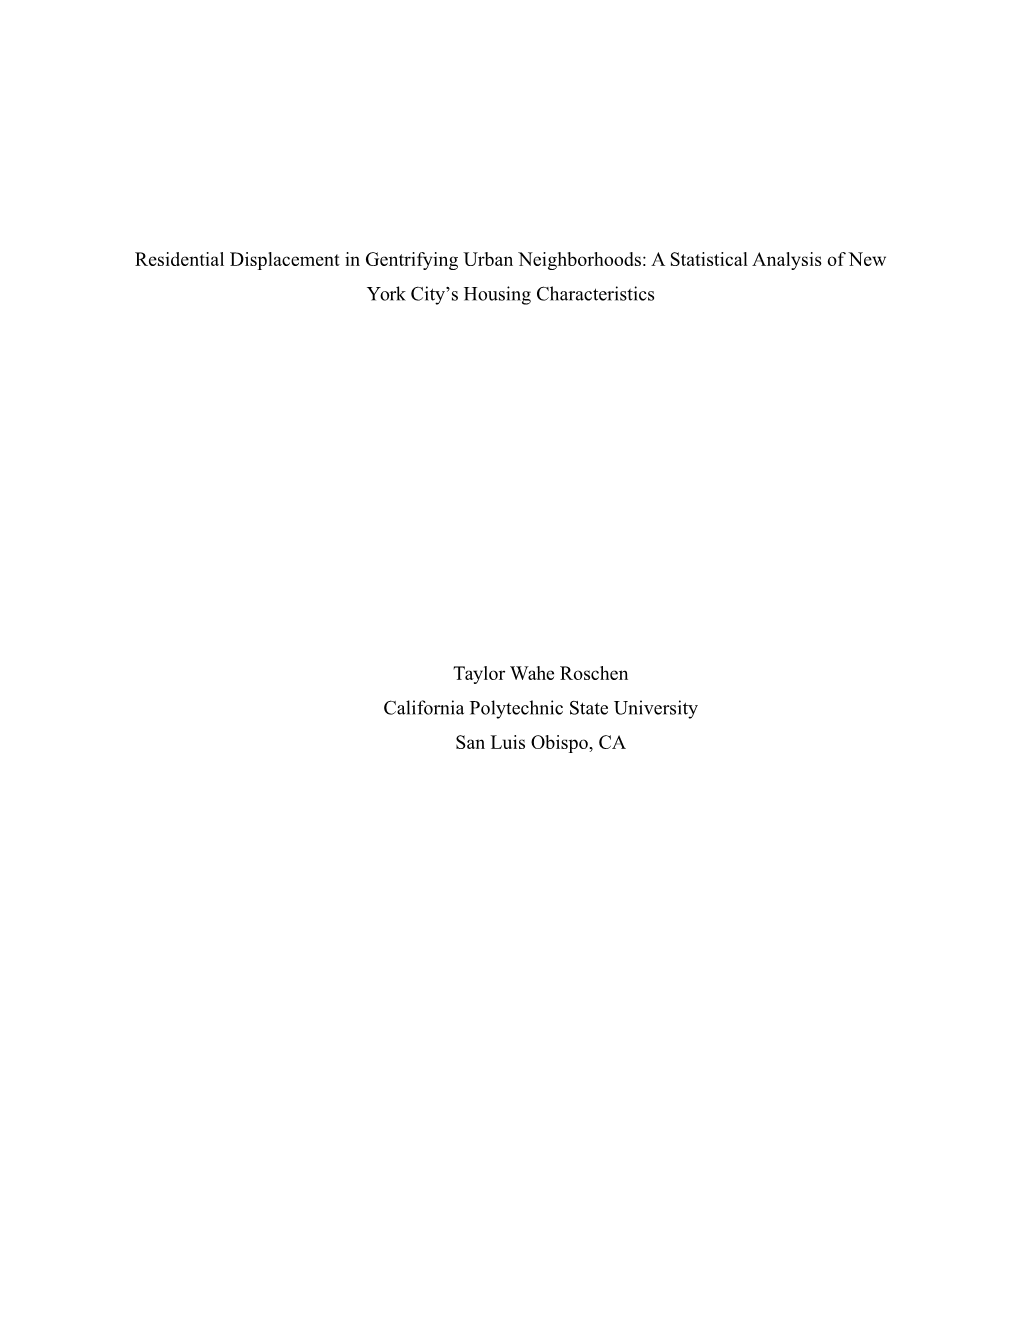 Residential Displacement in Gentrifying Urban Neighborhoods: a Statistical Analysis Of